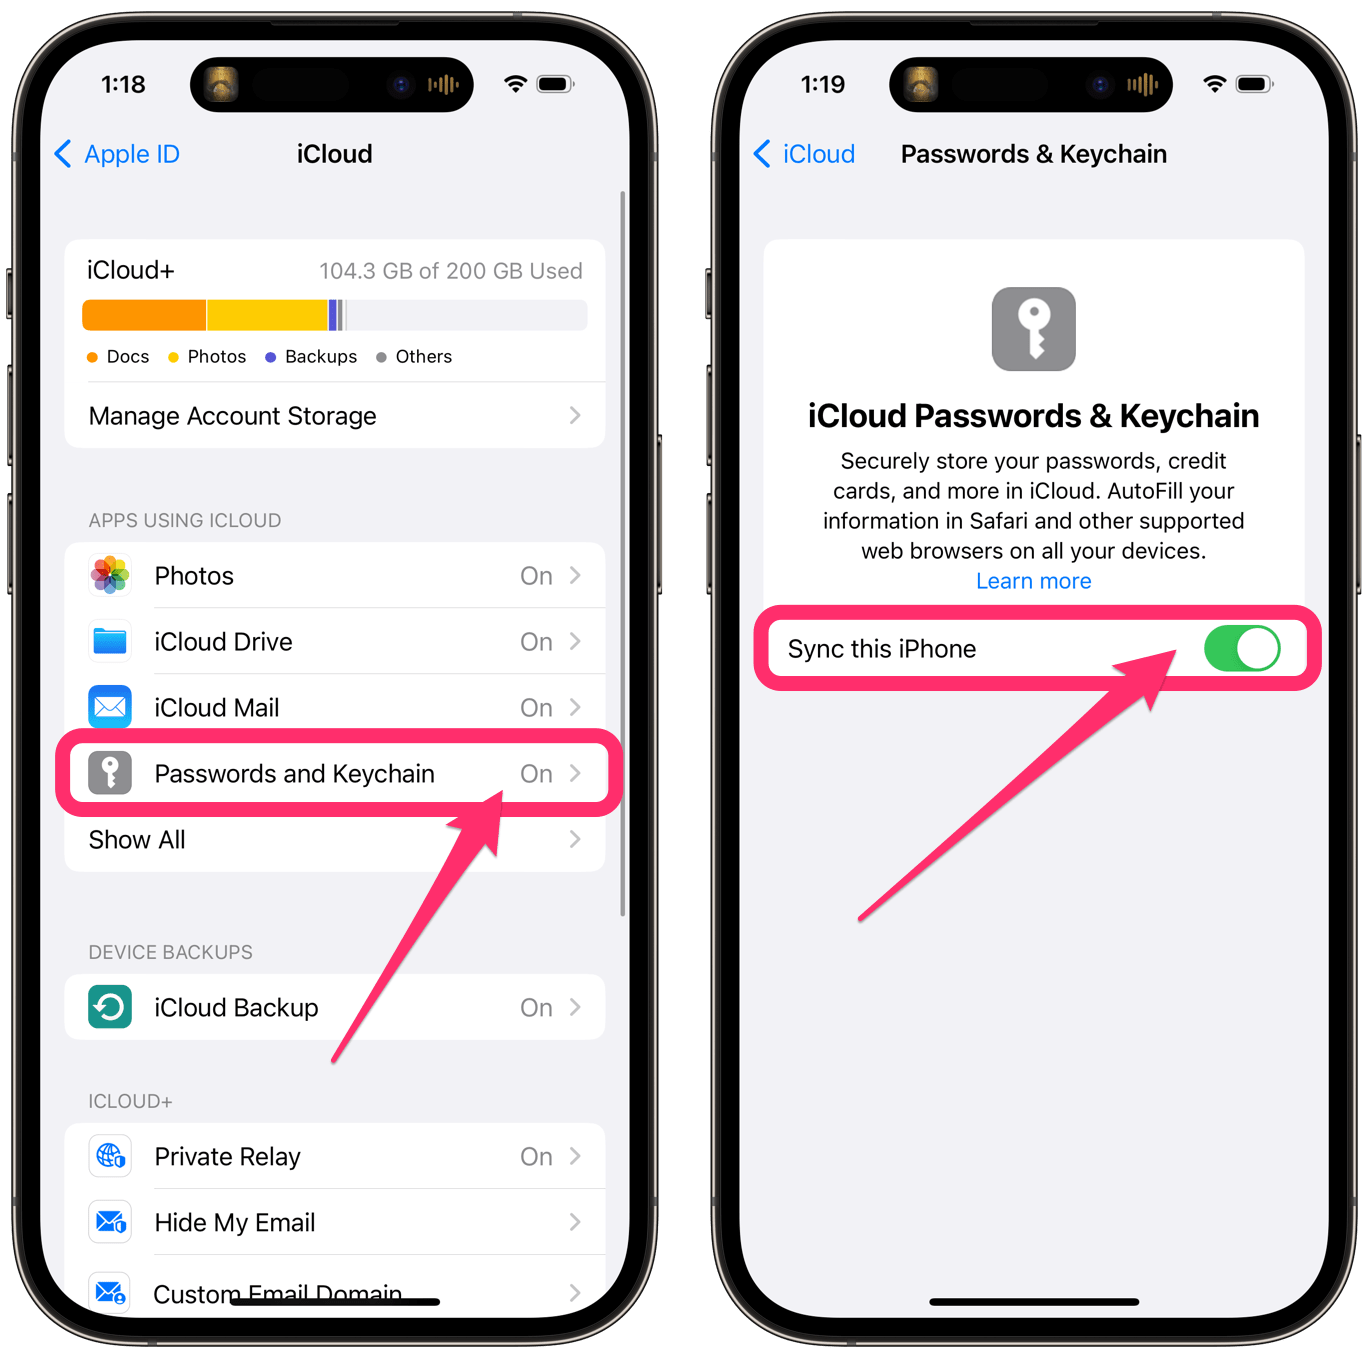 password and keychain in iPhone settings